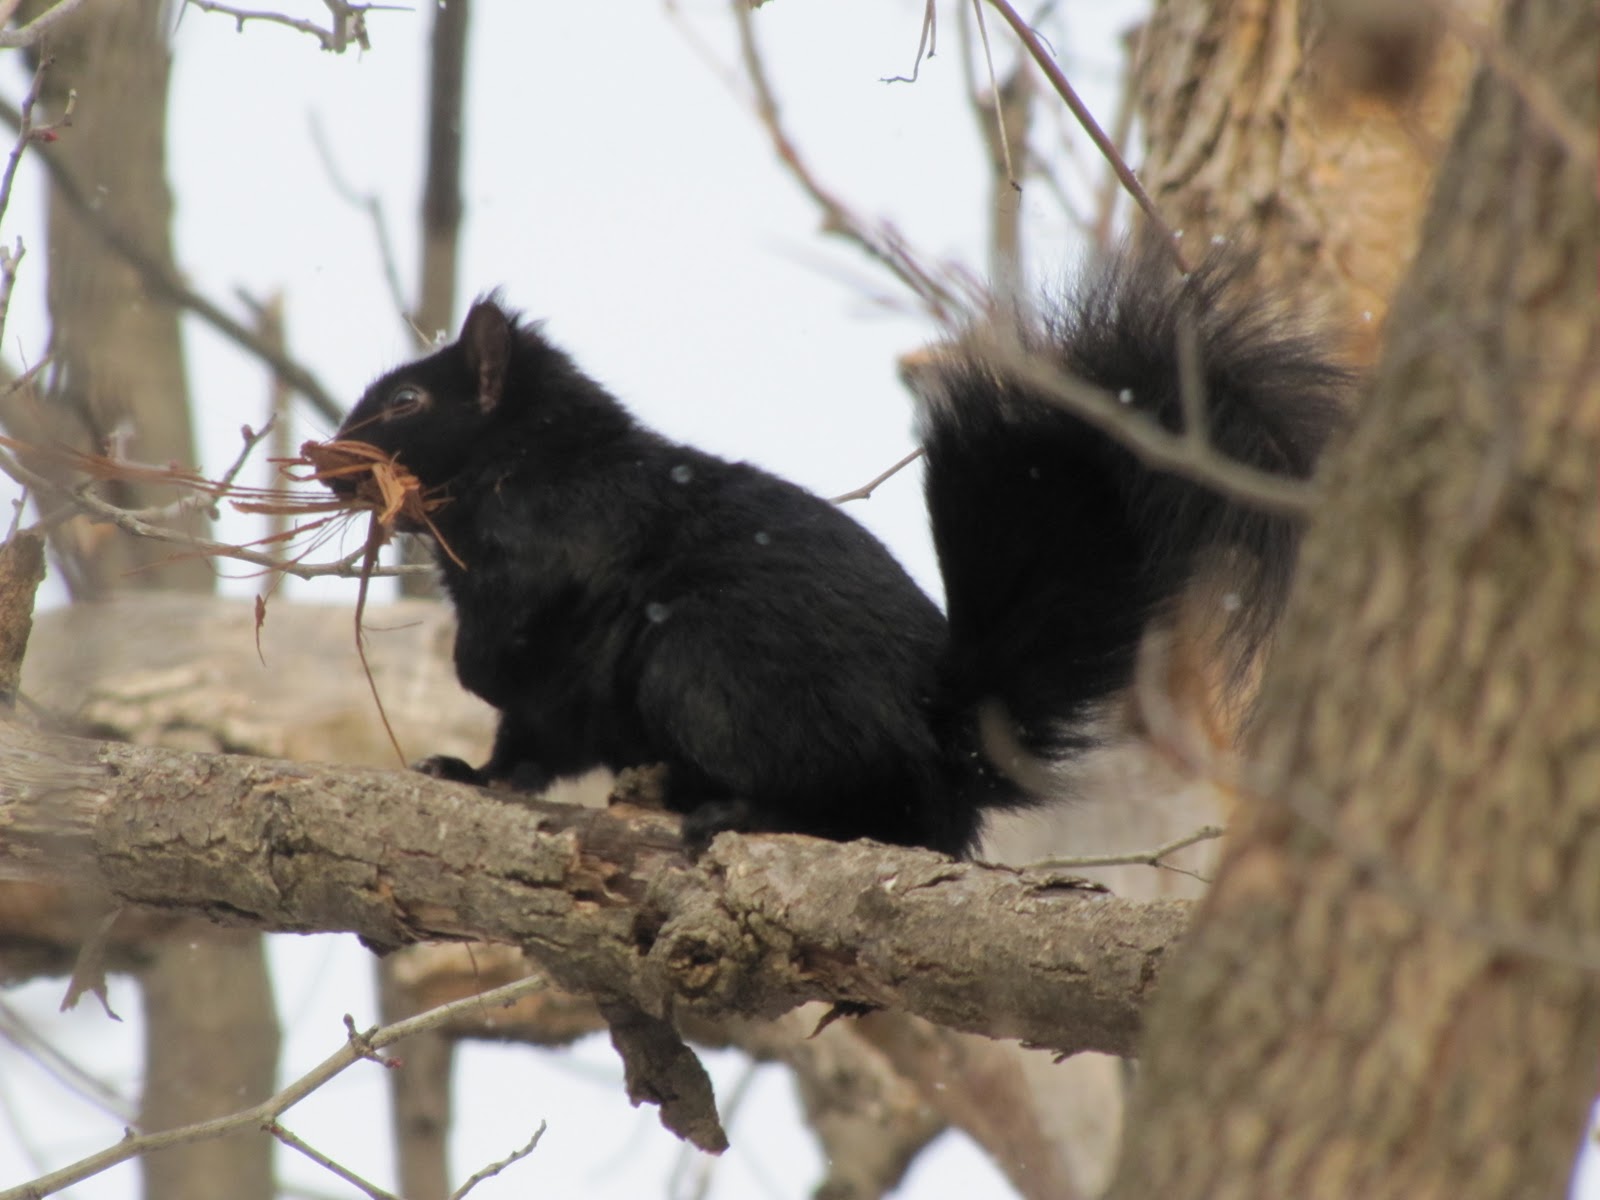 The Oakland Press Blogs: Earths Almanac: The Black Squirrels of Friendship Woods